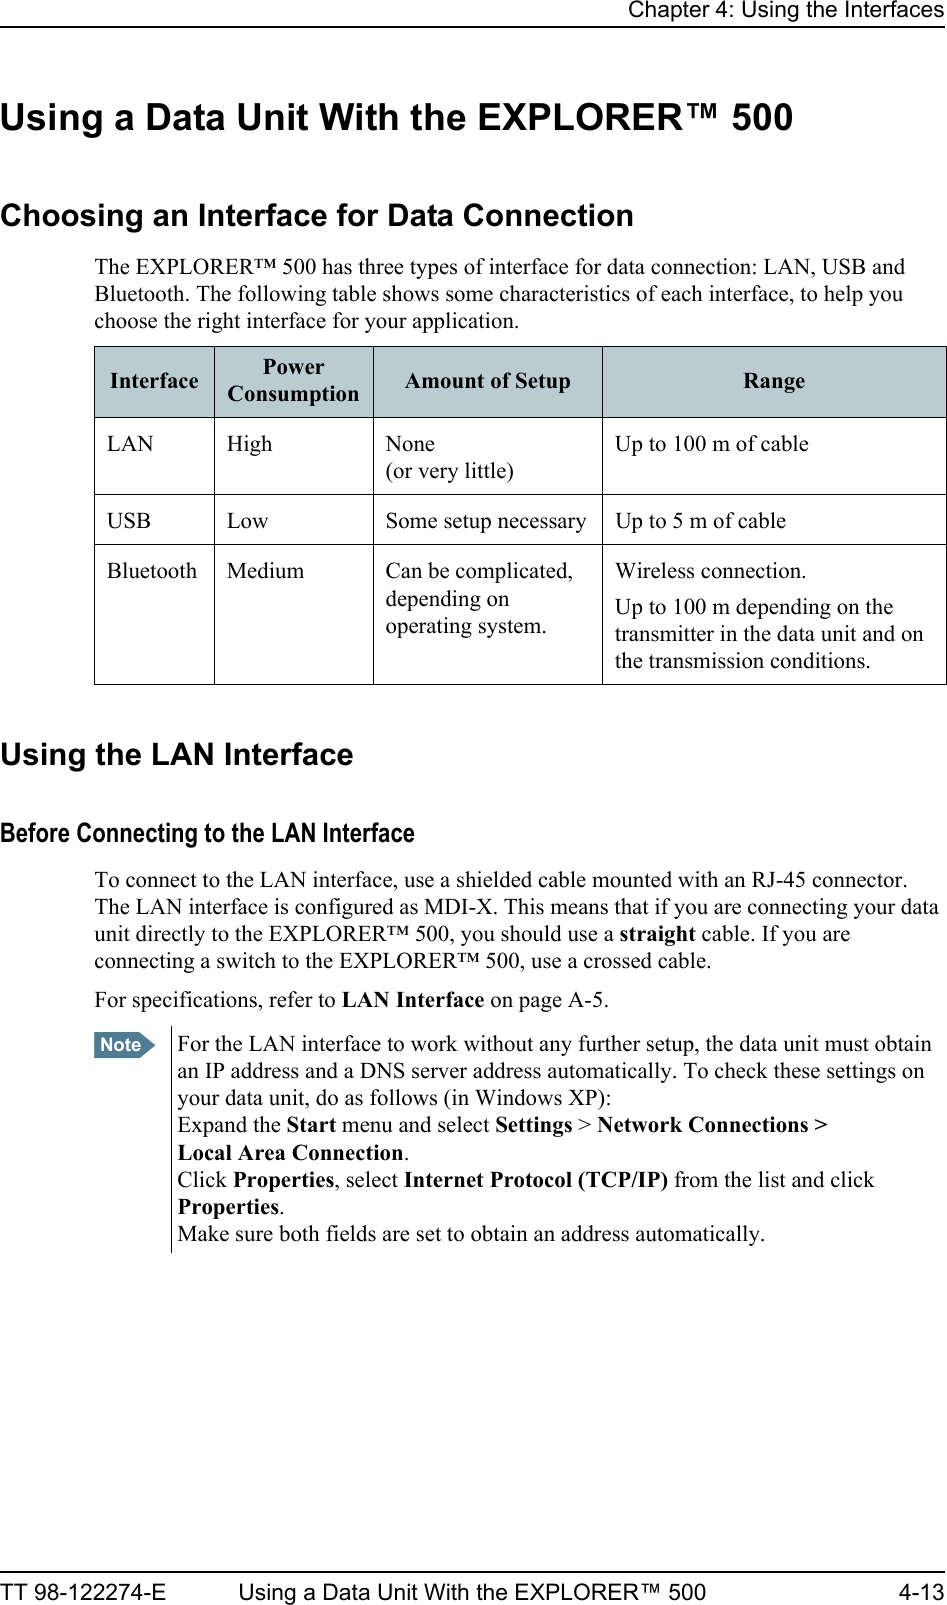 Chapter 4: Using the InterfacesTT 98-122274-E Using a Data Unit With the EXPLORER™ 500 4-13Using a Data Unit With the EXPLORER™ 500Choosing an Interface for Data ConnectionThe EXPLORER™ 500 has three types of interface for data connection: LAN, USB and Bluetooth. The following table shows some characteristics of each interface, to help you choose the right interface for your application.Using the LAN InterfaceBefore Connecting to the LAN InterfaceTo connect to the LAN interface, use a shielded cable mounted with an RJ-45 connector. The LAN interface is configured as MDI-X. This means that if you are connecting your data unit directly to the EXPLORER™ 500, you should use a straight cable. If you are connecting a switch to the EXPLORER™ 500, use a crossed cable.For specifications, refer to LAN Interface on page A-5.Interface Power Consumption Amount of Setup RangeLAN High None (or very little)Up to 100 m of cableUSB Low Some setup necessary Up to 5 m of cableBluetooth Medium Can be complicated, depending on operating system.Wireless connection.Up to 100 m depending on the transmitter in the data unit and on the transmission conditions.Note For the LAN interface to work without any further setup, the data unit must obtain an IP address and a DNS server address automatically. To check these settings on your data unit, do as follows (in Windows XP):Expand the Start menu and select Settings &gt; Network Connections &gt; Local Area Connection. Click Properties, select Internet Protocol (TCP/IP) from the list and click Properties. Make sure both fields are set to obtain an address automatically.